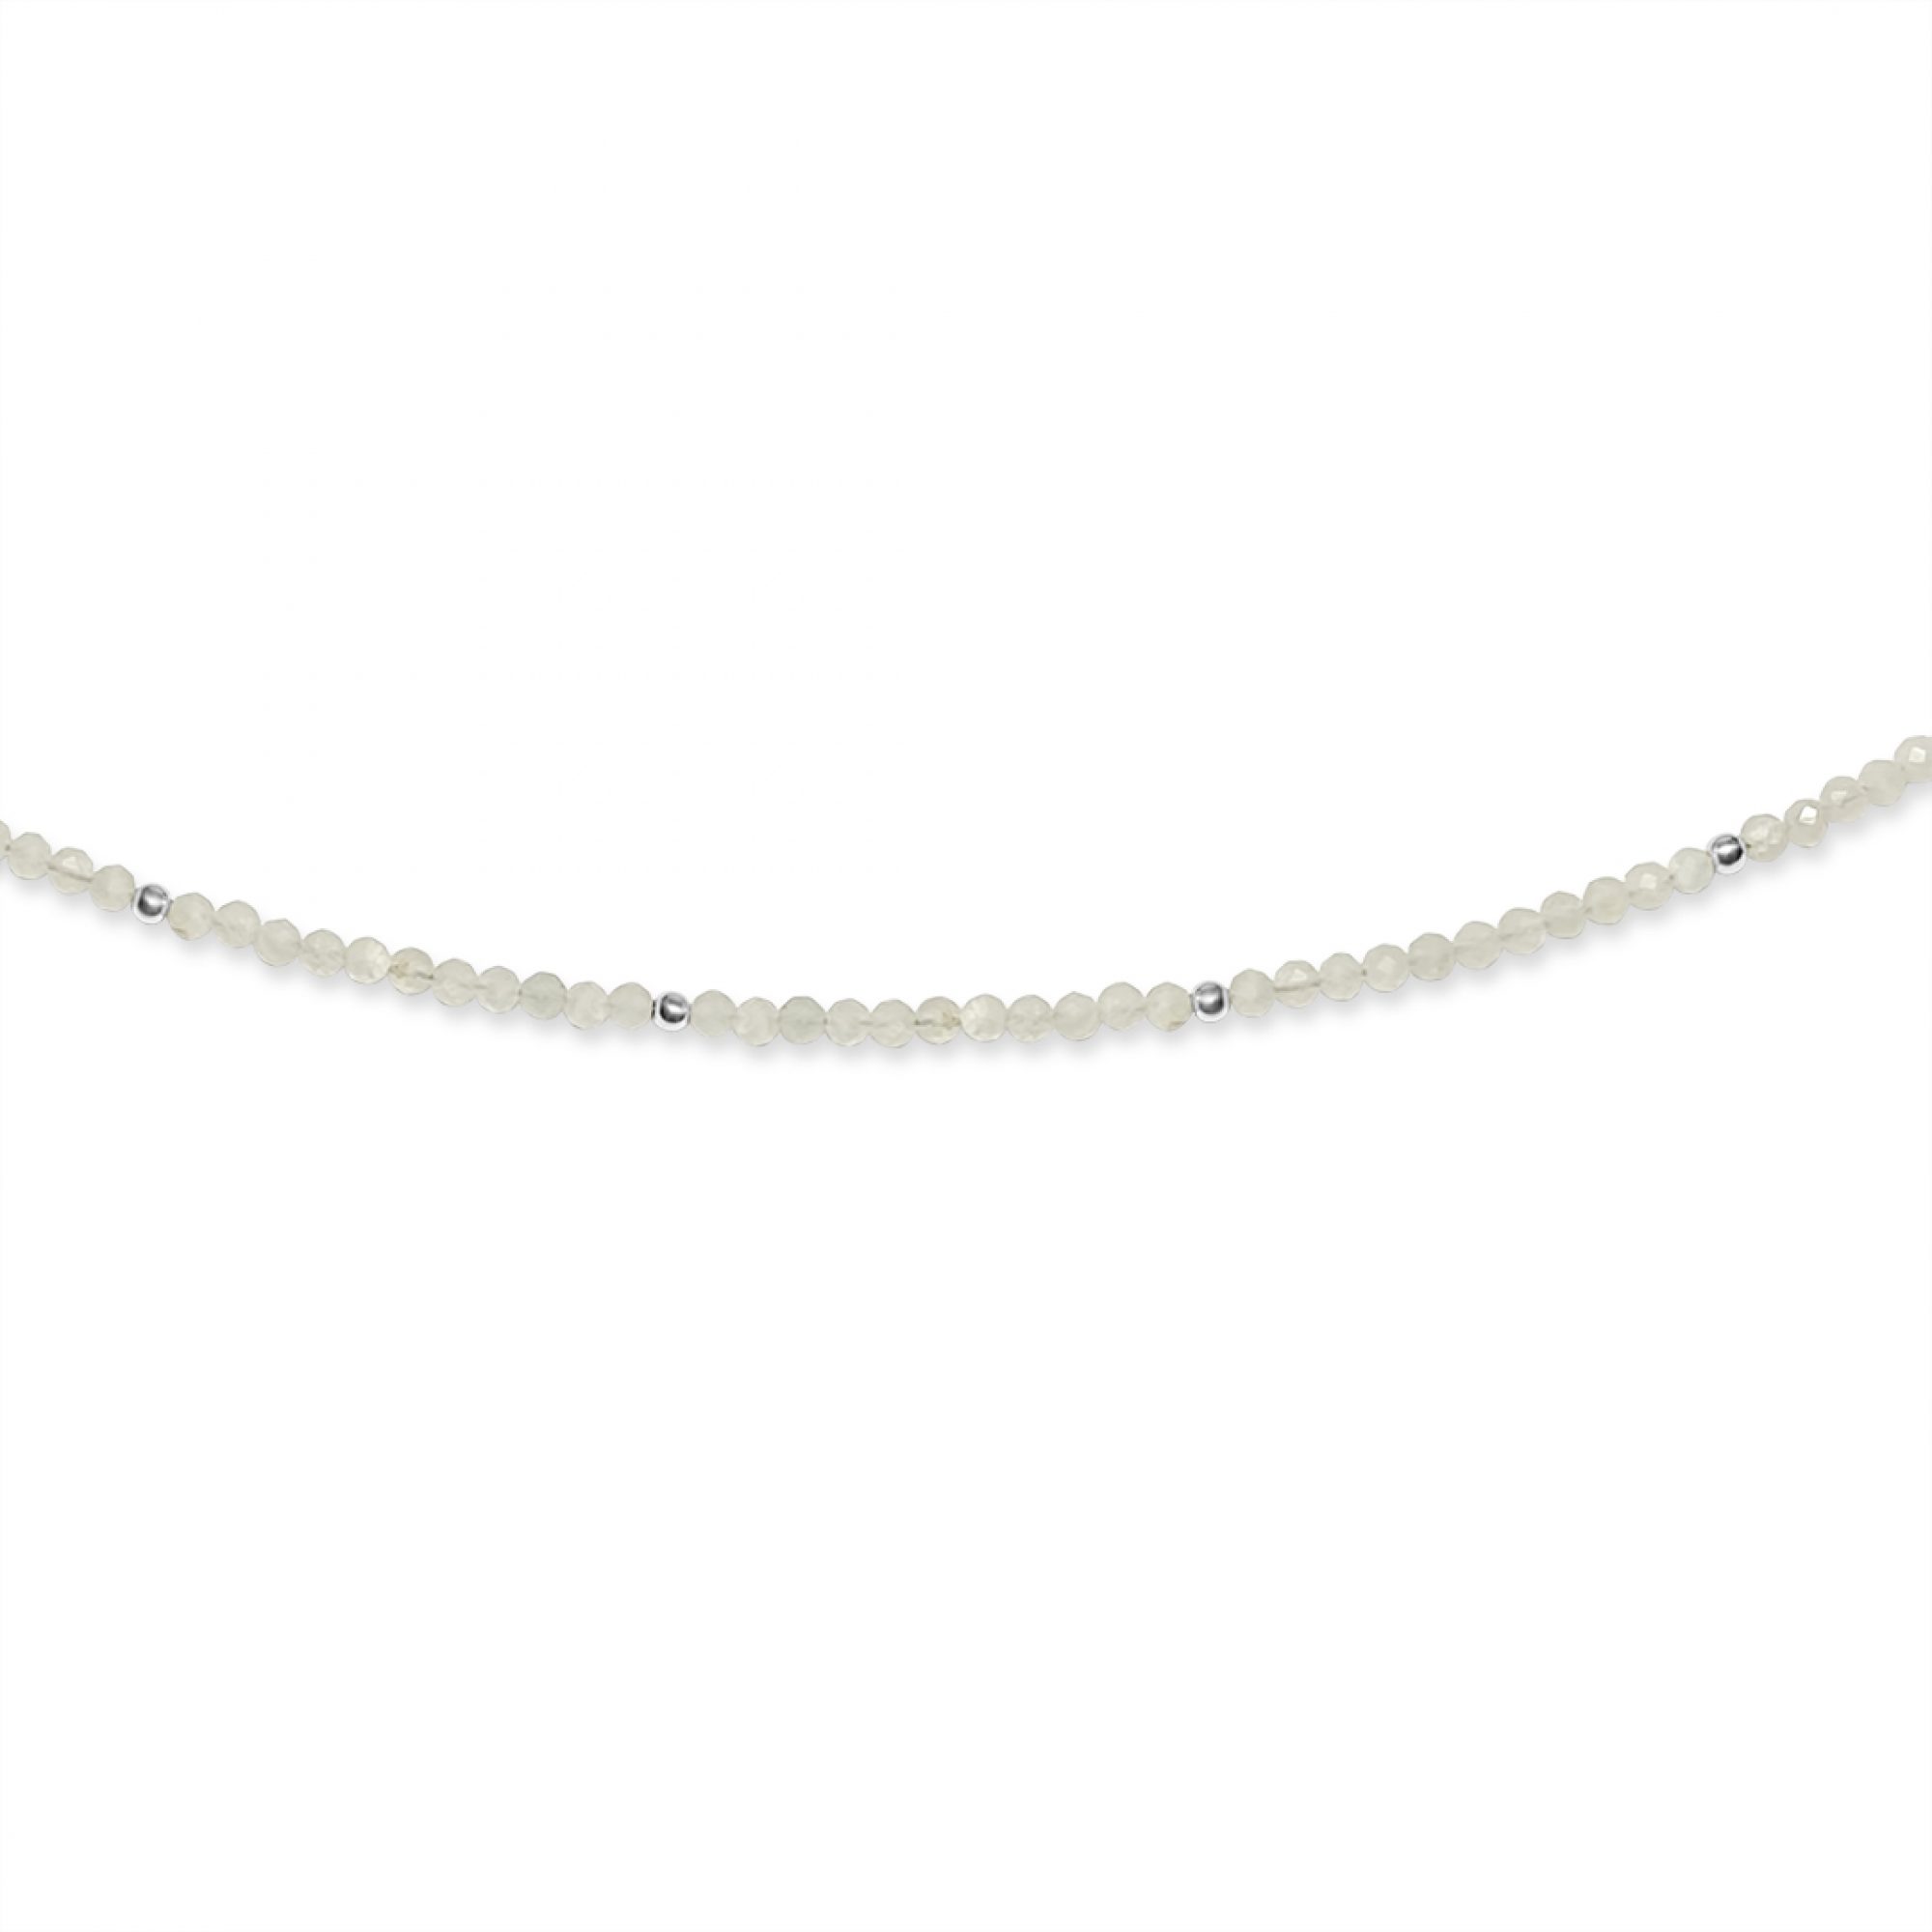 Anklet with moonstone beads